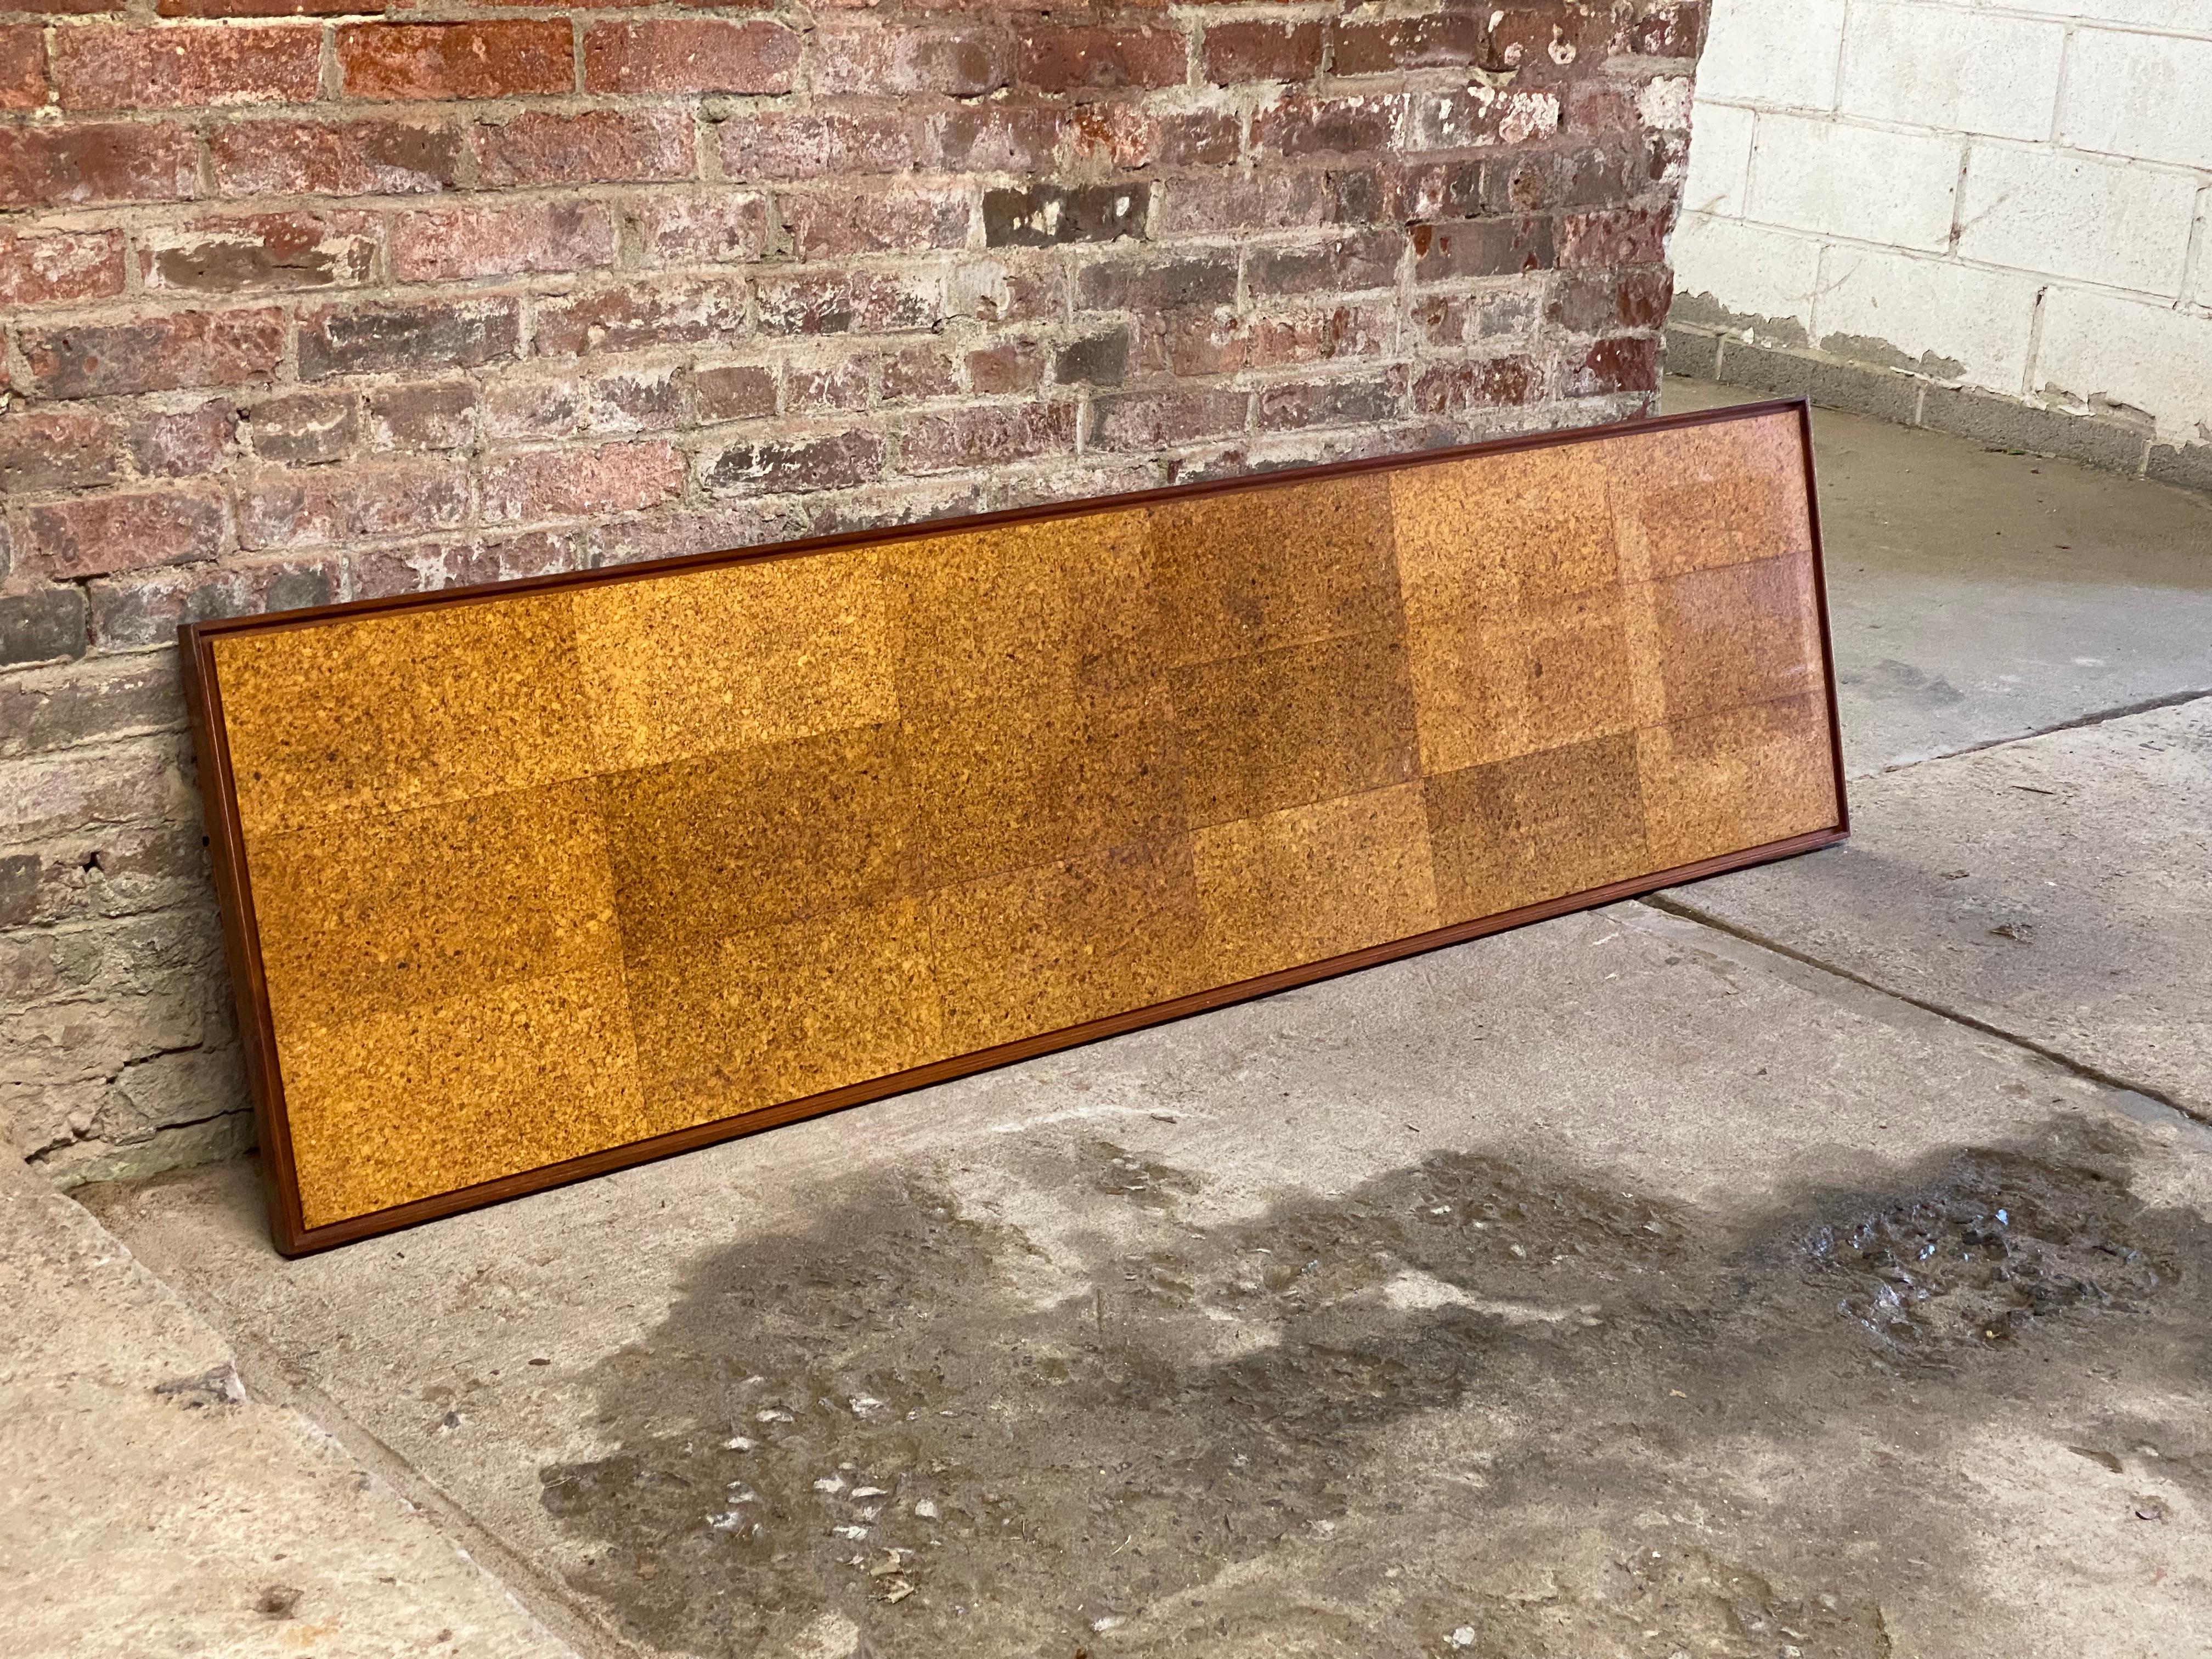 Massive solid walnut framed wall mounted cork board. Circa 1955-60. Two mounting channels on the reverse and backed with old paper. The panel can be used almost anywhere in the home or office. There is no comparison between the visual benefits of